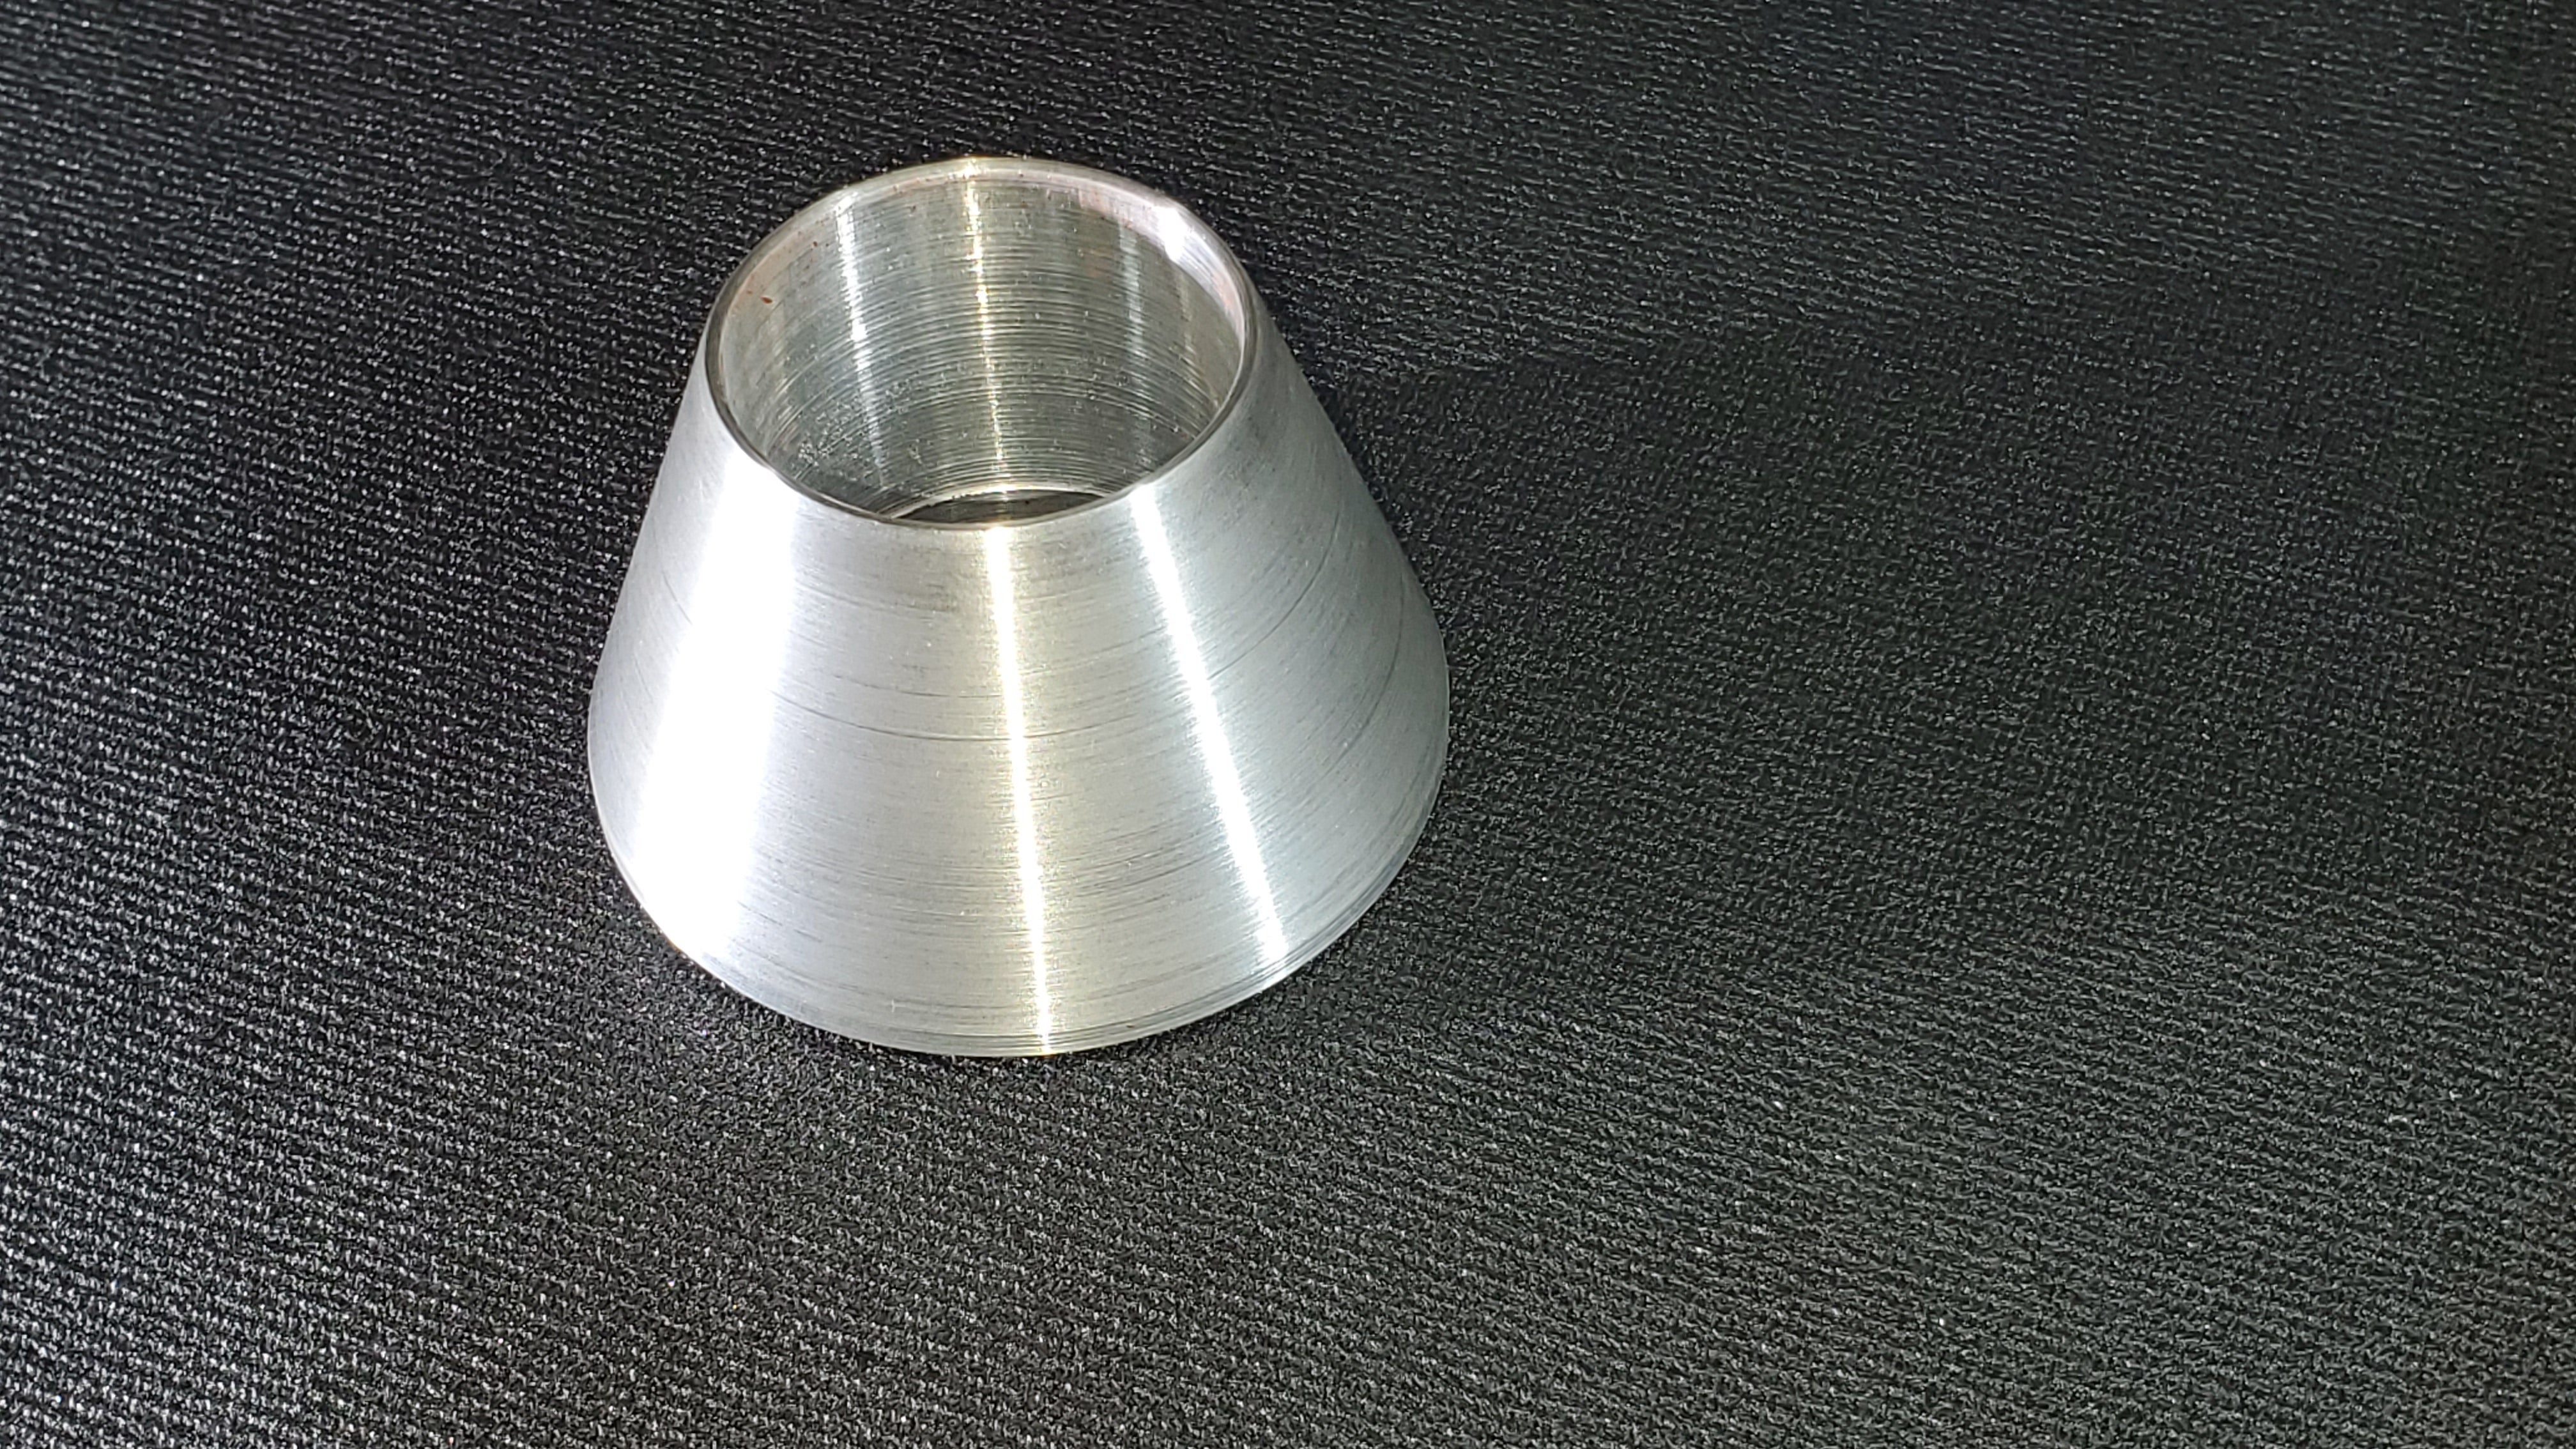 3 inch Wheel Centering Cone for Tire Changing